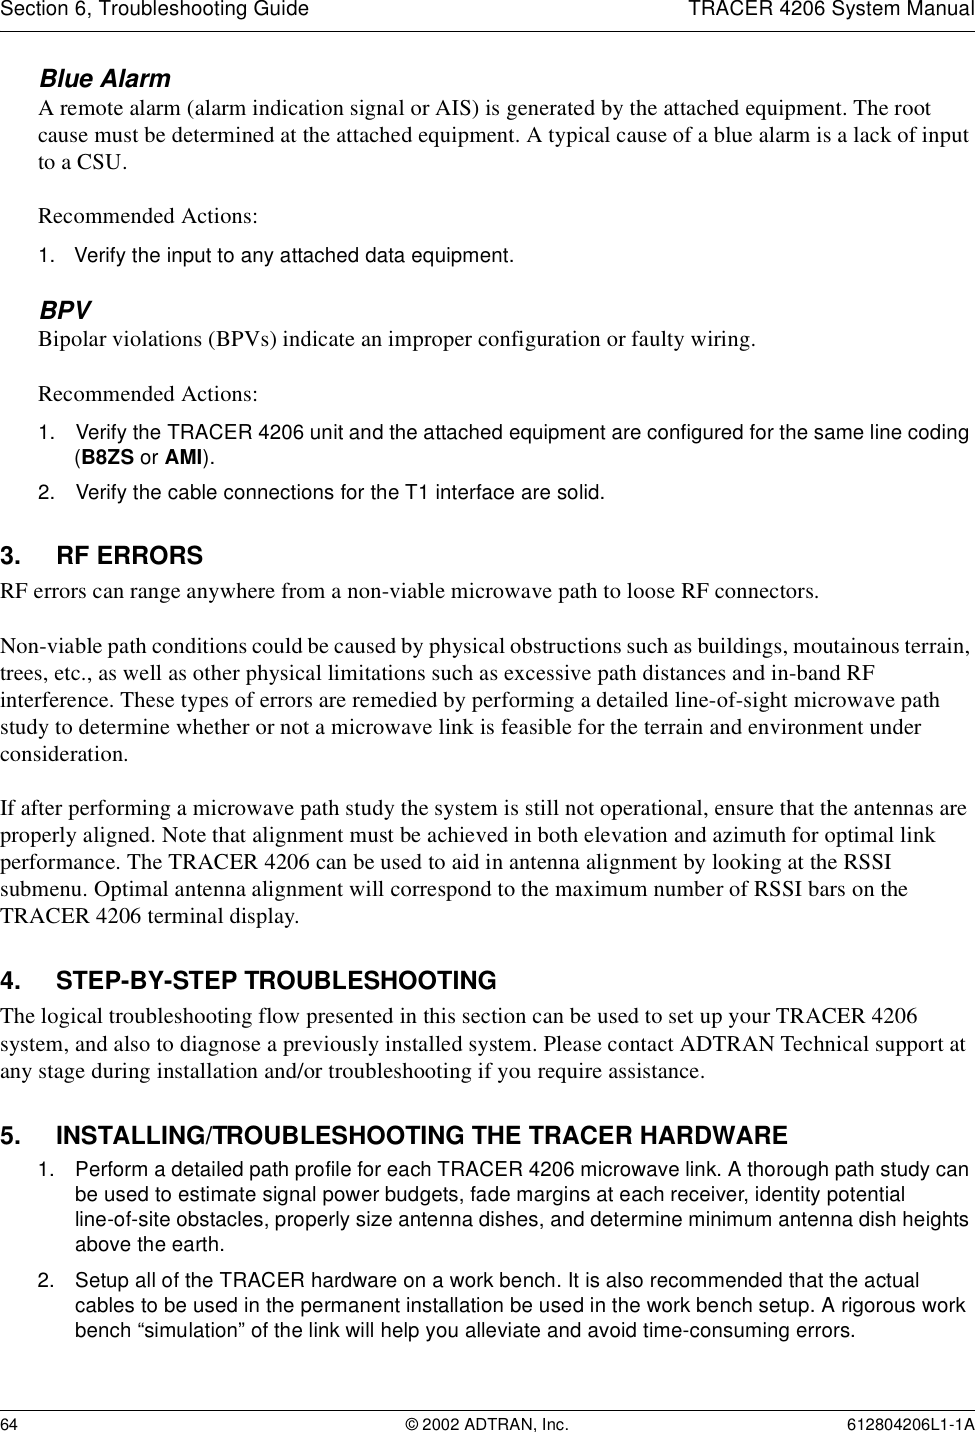 Section 6, Troubleshooting Guide TRACER 4206 System Manual64 © 2002 ADTRAN, Inc. 612804206L1-1ABlue Alarm A remote alarm (alarm indication signal or AIS) is generated by the attached equipment. The root cause must be determined at the attached equipment. A typical cause of a blue alarm is a lack of input to a CSU.Recommended Actions:1. Verify the input to any attached data equipment.BPVBipolar violations (BPVs) indicate an improper configuration or faulty wiring.Recommended Actions:1. Verify the TRACER 4206 unit and the attached equipment are configured for the same line coding (B8ZS or AMI).2. Verify the cable connections for the T1 interface are solid.3. RF ERRORSRF errors can range anywhere from a non-viable microwave path to loose RF connectors.Non-viable path conditions could be caused by physical obstructions such as buildings, moutainous terrain, trees, etc., as well as other physical limitations such as excessive path distances and in-band RF interference. These types of errors are remedied by performing a detailed line-of-sight microwave path study to determine whether or not a microwave link is feasible for the terrain and environment under consideration.If after performing a microwave path study the system is still not operational, ensure that the antennas are properly aligned. Note that alignment must be achieved in both elevation and azimuth for optimal link performance. The TRACER 4206 can be used to aid in antenna alignment by looking at the RSSI submenu. Optimal antenna alignment will correspond to the maximum number of RSSI bars on the TRACER 4206 terminal display.4. STEP-BY-STEP TROUBLESHOOTINGThe logical troubleshooting flow presented in this section can be used to set up your TRACER 4206 system, and also to diagnose a previously installed system. Please contact ADTRAN Technical support at any stage during installation and/or troubleshooting if you require assistance.5. INSTALLING/TROUBLESHOOTING THE TRACER HARDWARE1. Perform a detailed path profile for each TRACER 4206 microwave link. A thorough path study can be used to estimate signal power budgets, fade margins at each receiver, identity potential line-of-site obstacles, properly size antenna dishes, and determine minimum antenna dish heights above the earth.2. Setup all of the TRACER hardware on a work bench. It is also recommended that the actual cables to be used in the permanent installation be used in the work bench setup. A rigorous work bench “simulation” of the link will help you alleviate and avoid time-consuming errors.